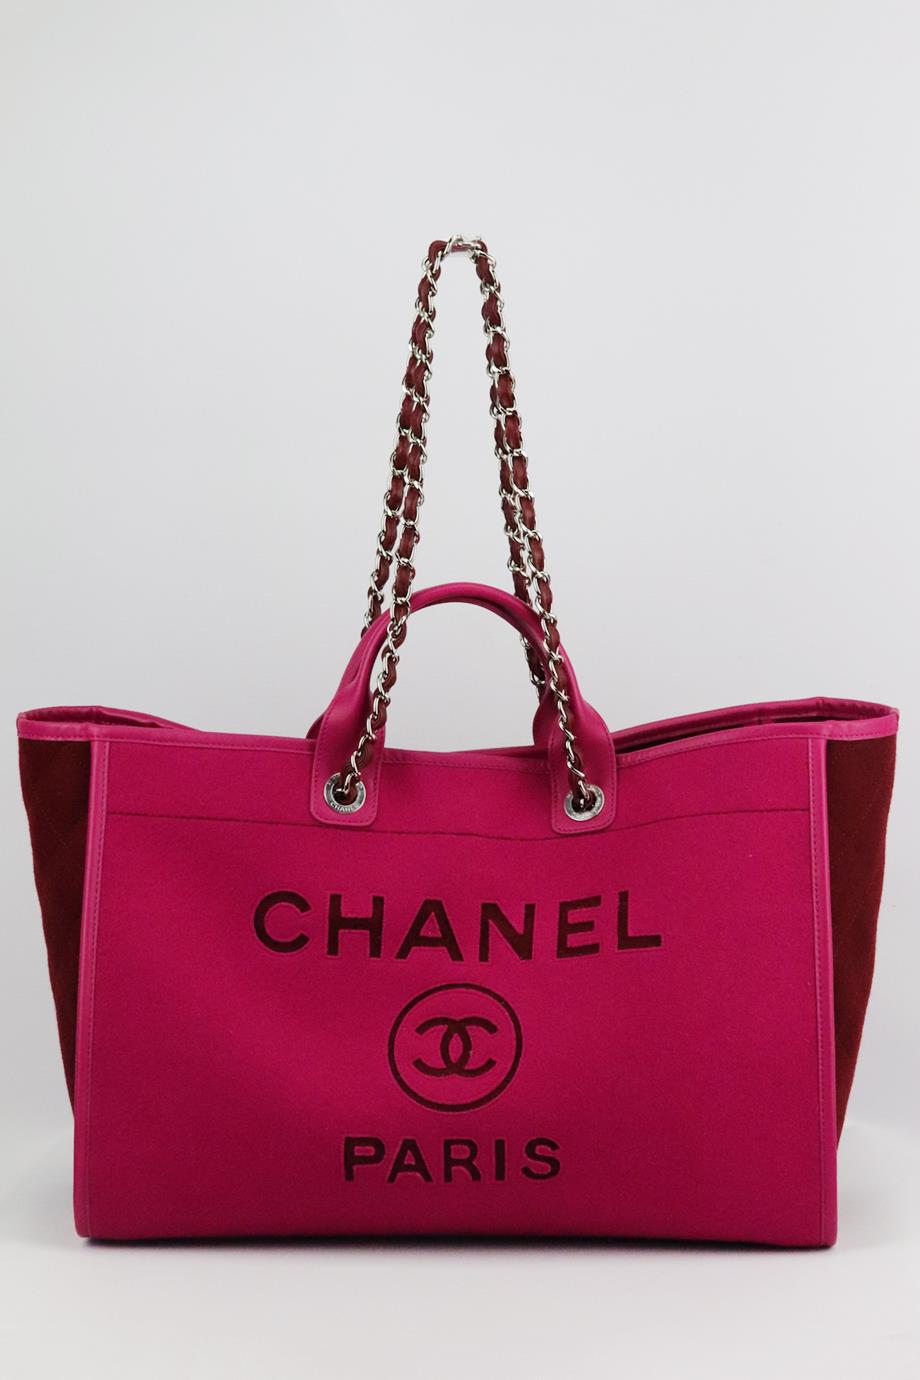 Chanel Wool Felt Large Deauville Tote - Black Totes, Handbags - CHA712166